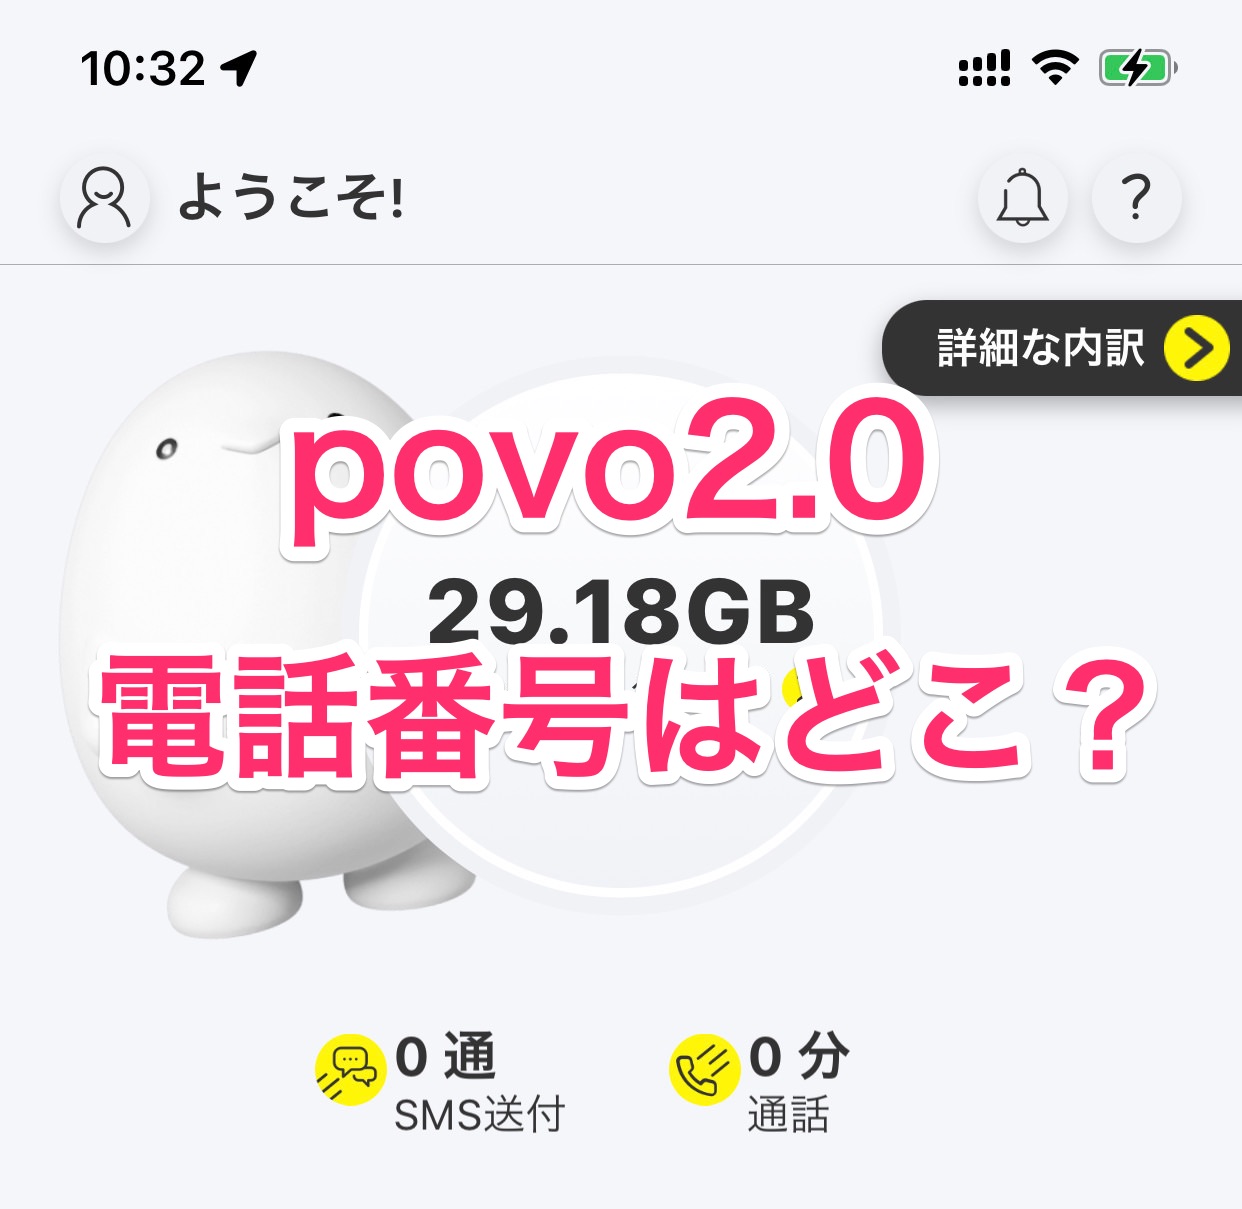 Povo phone number 30000 title